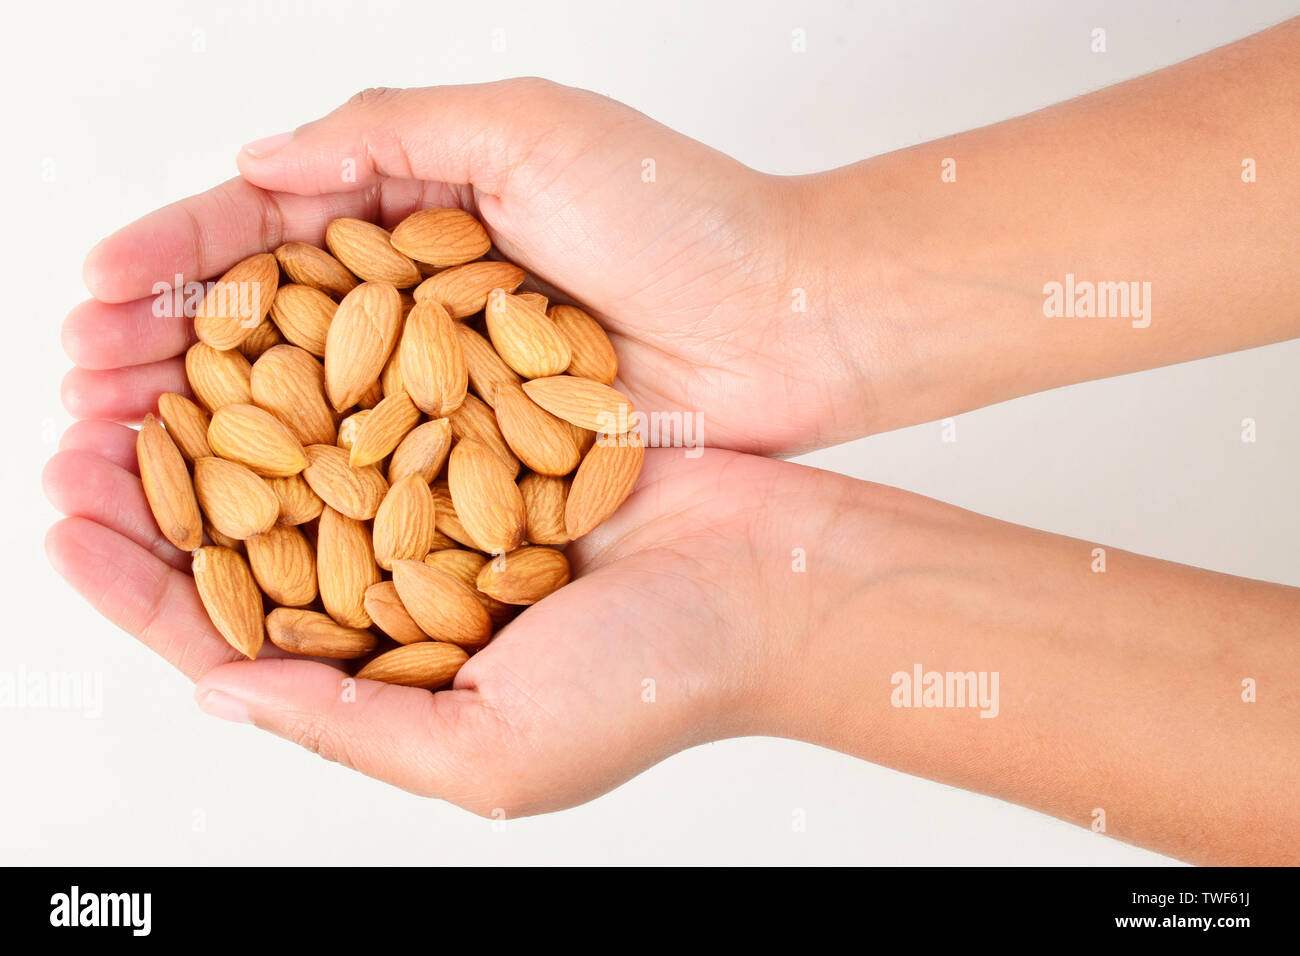 almonds in hand isolated on white background, badam in hand Stock Photo